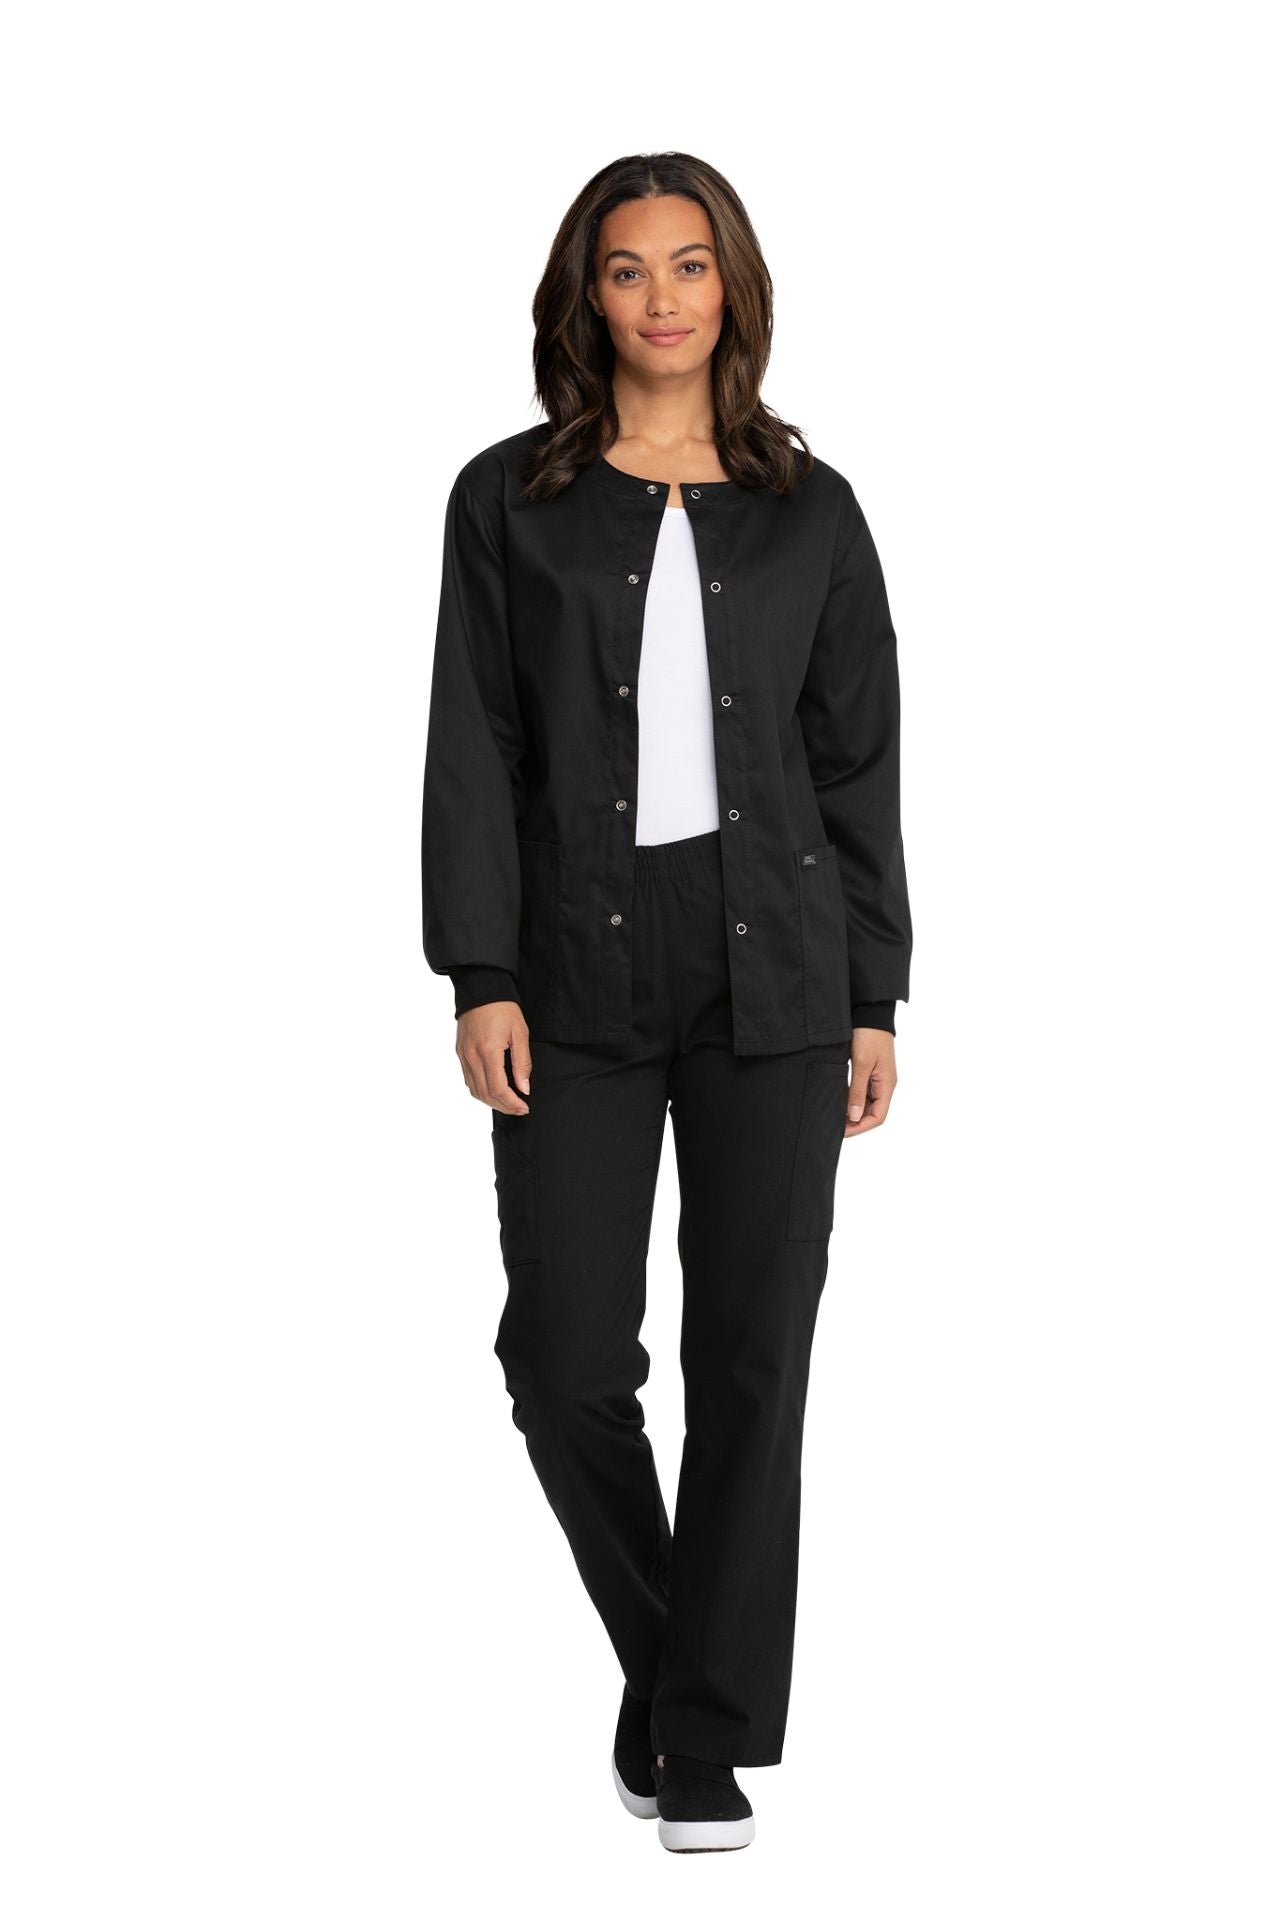 CLEARANCE Unisex Snap Front Jacket